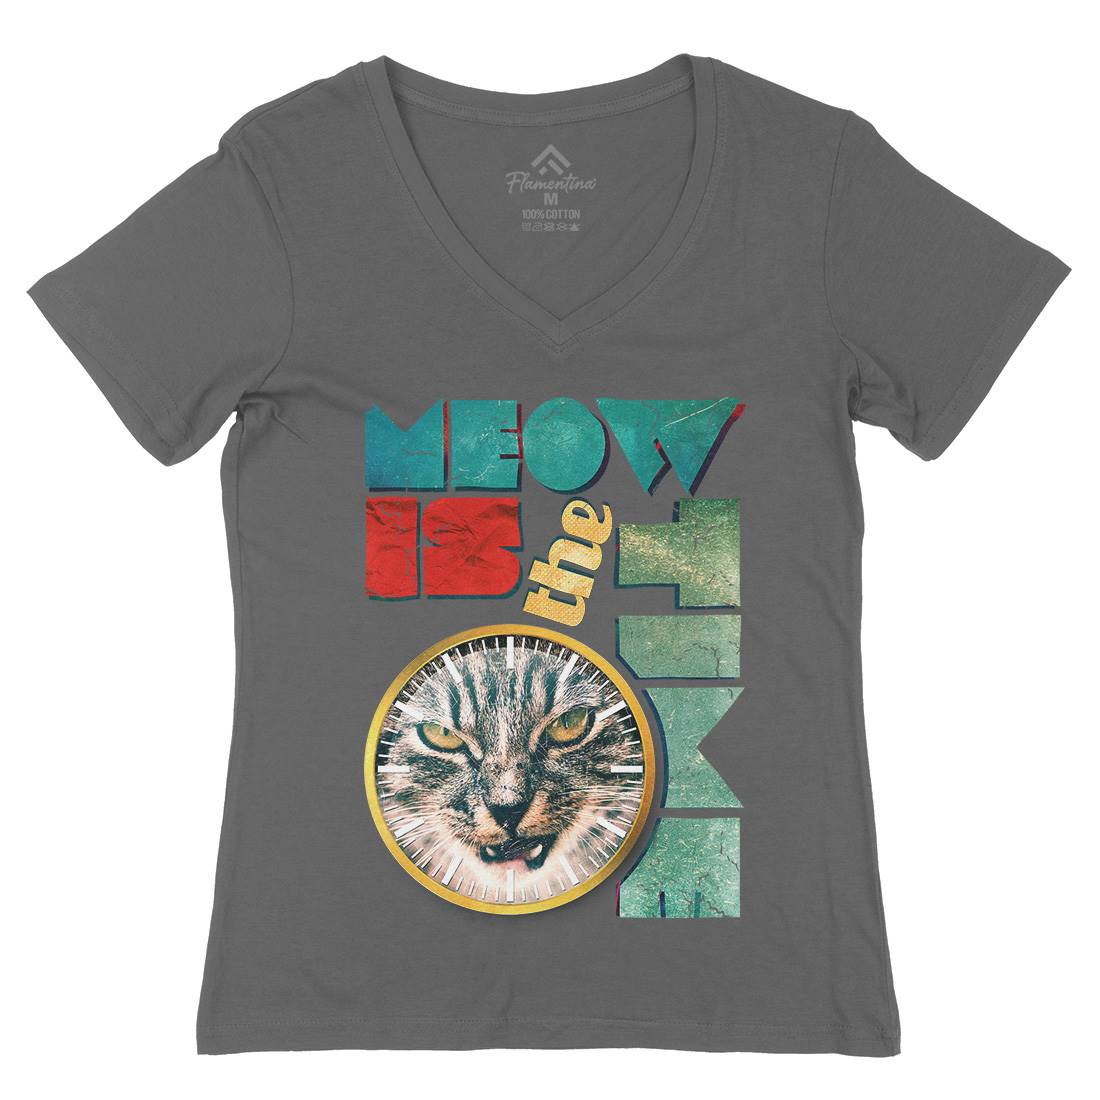 Meow Is The Time Womens Organic V-Neck T-Shirt Animals A876